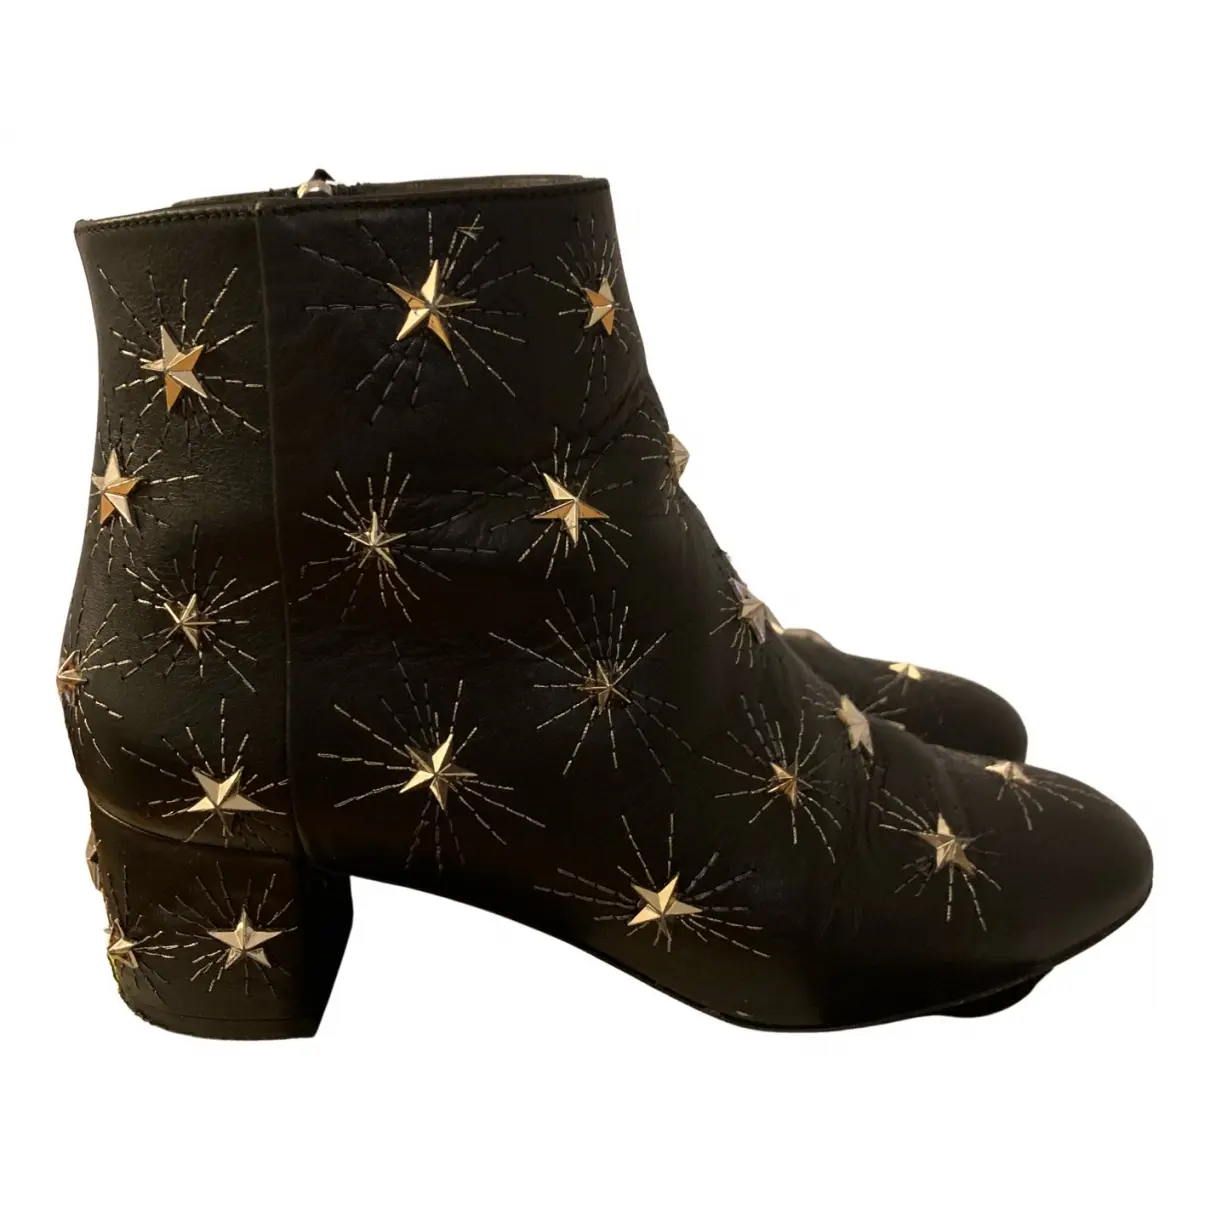 Cosmic Star leather ankle boots Aquazzura